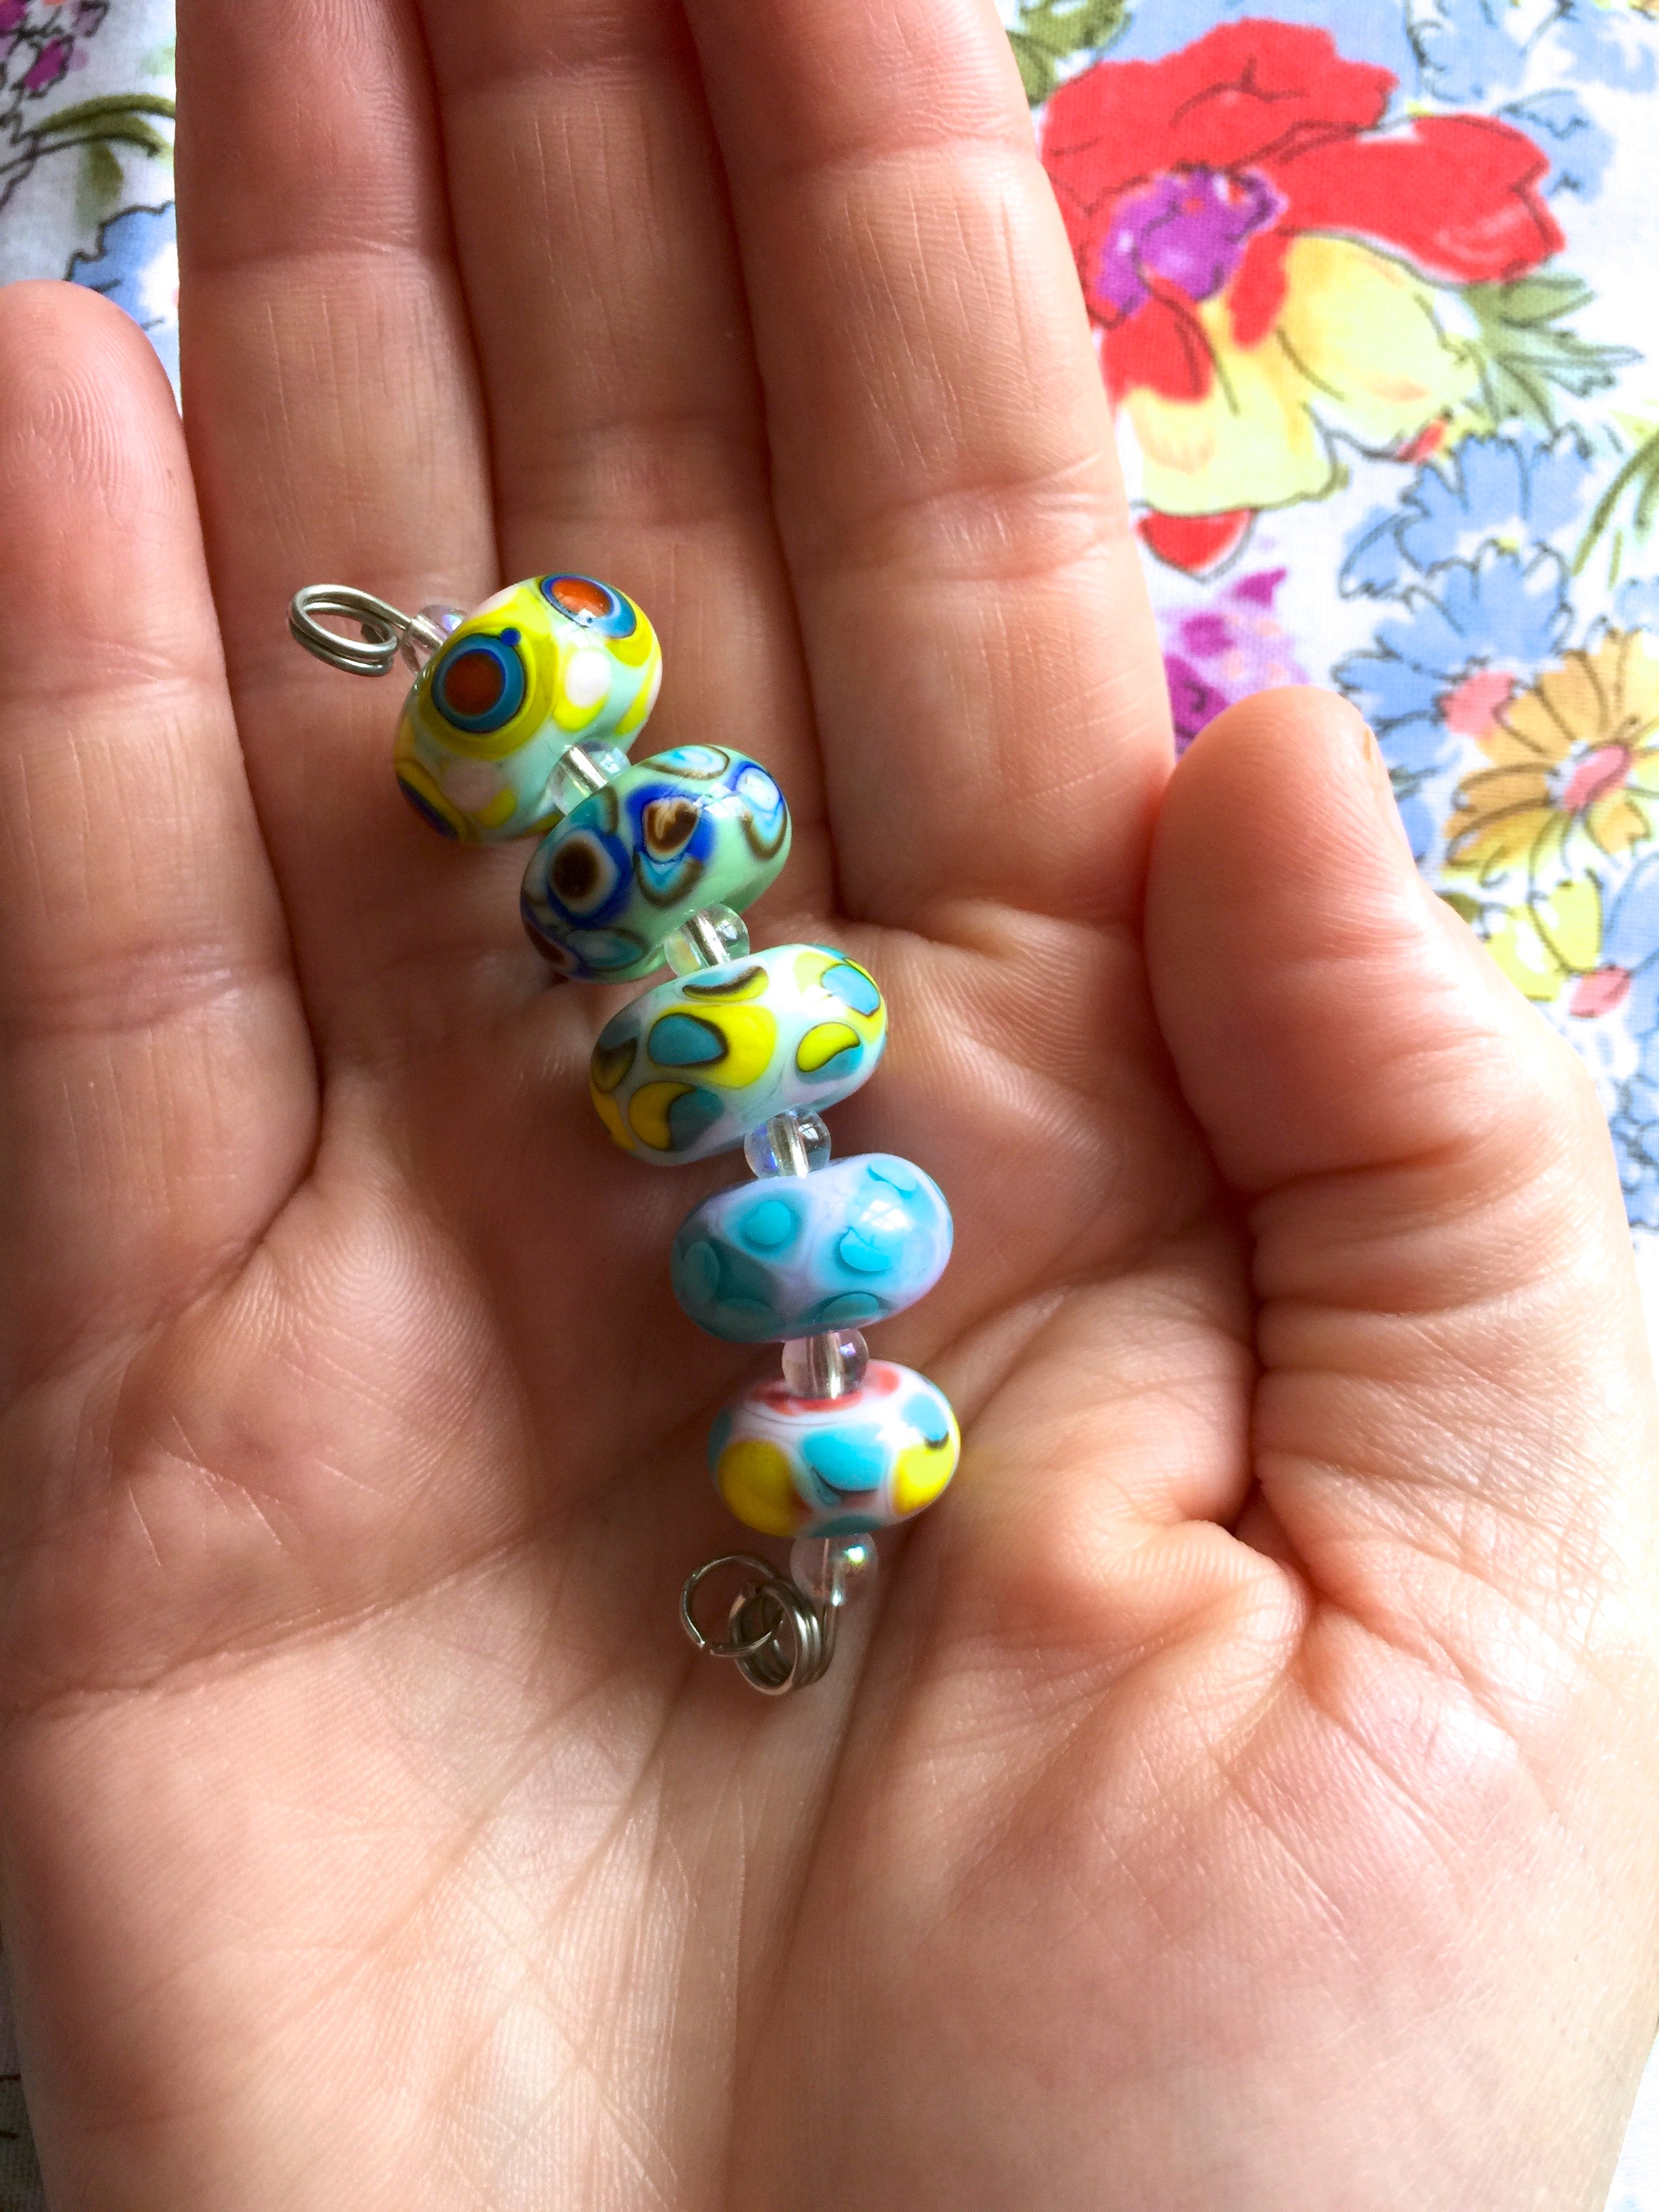 Set of 6 Handcrafted Lampwork Glass Beads in pretty mix of pastels and bright dots.